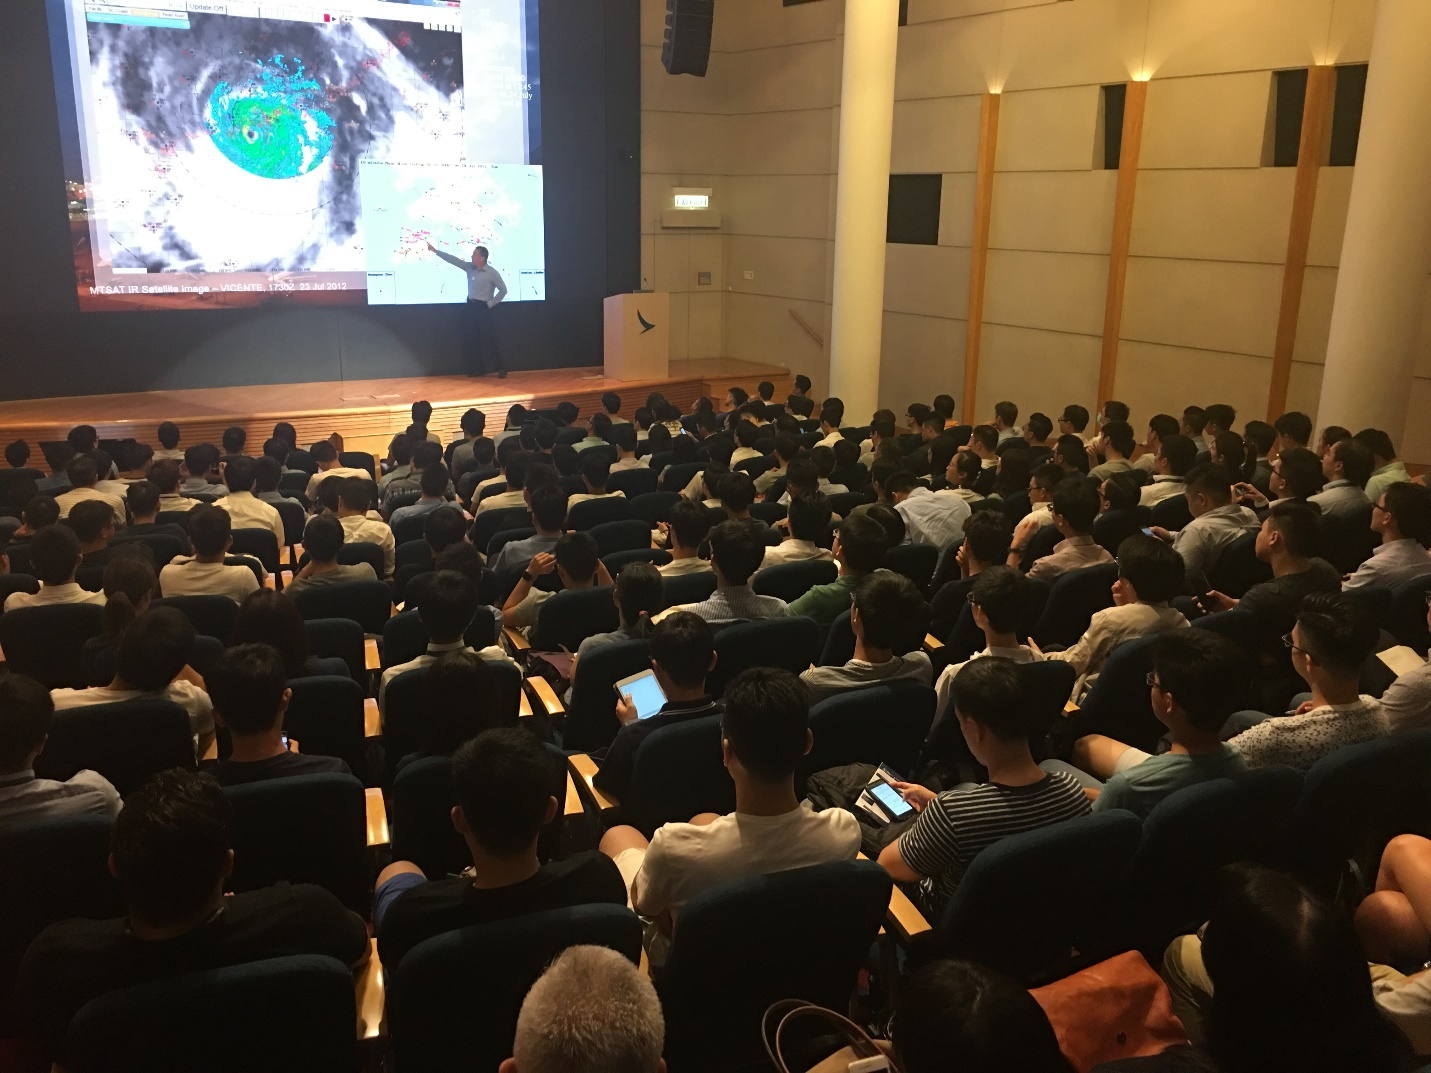 Mr. William Shum presented the aviation-related weather phenomena to the audiences